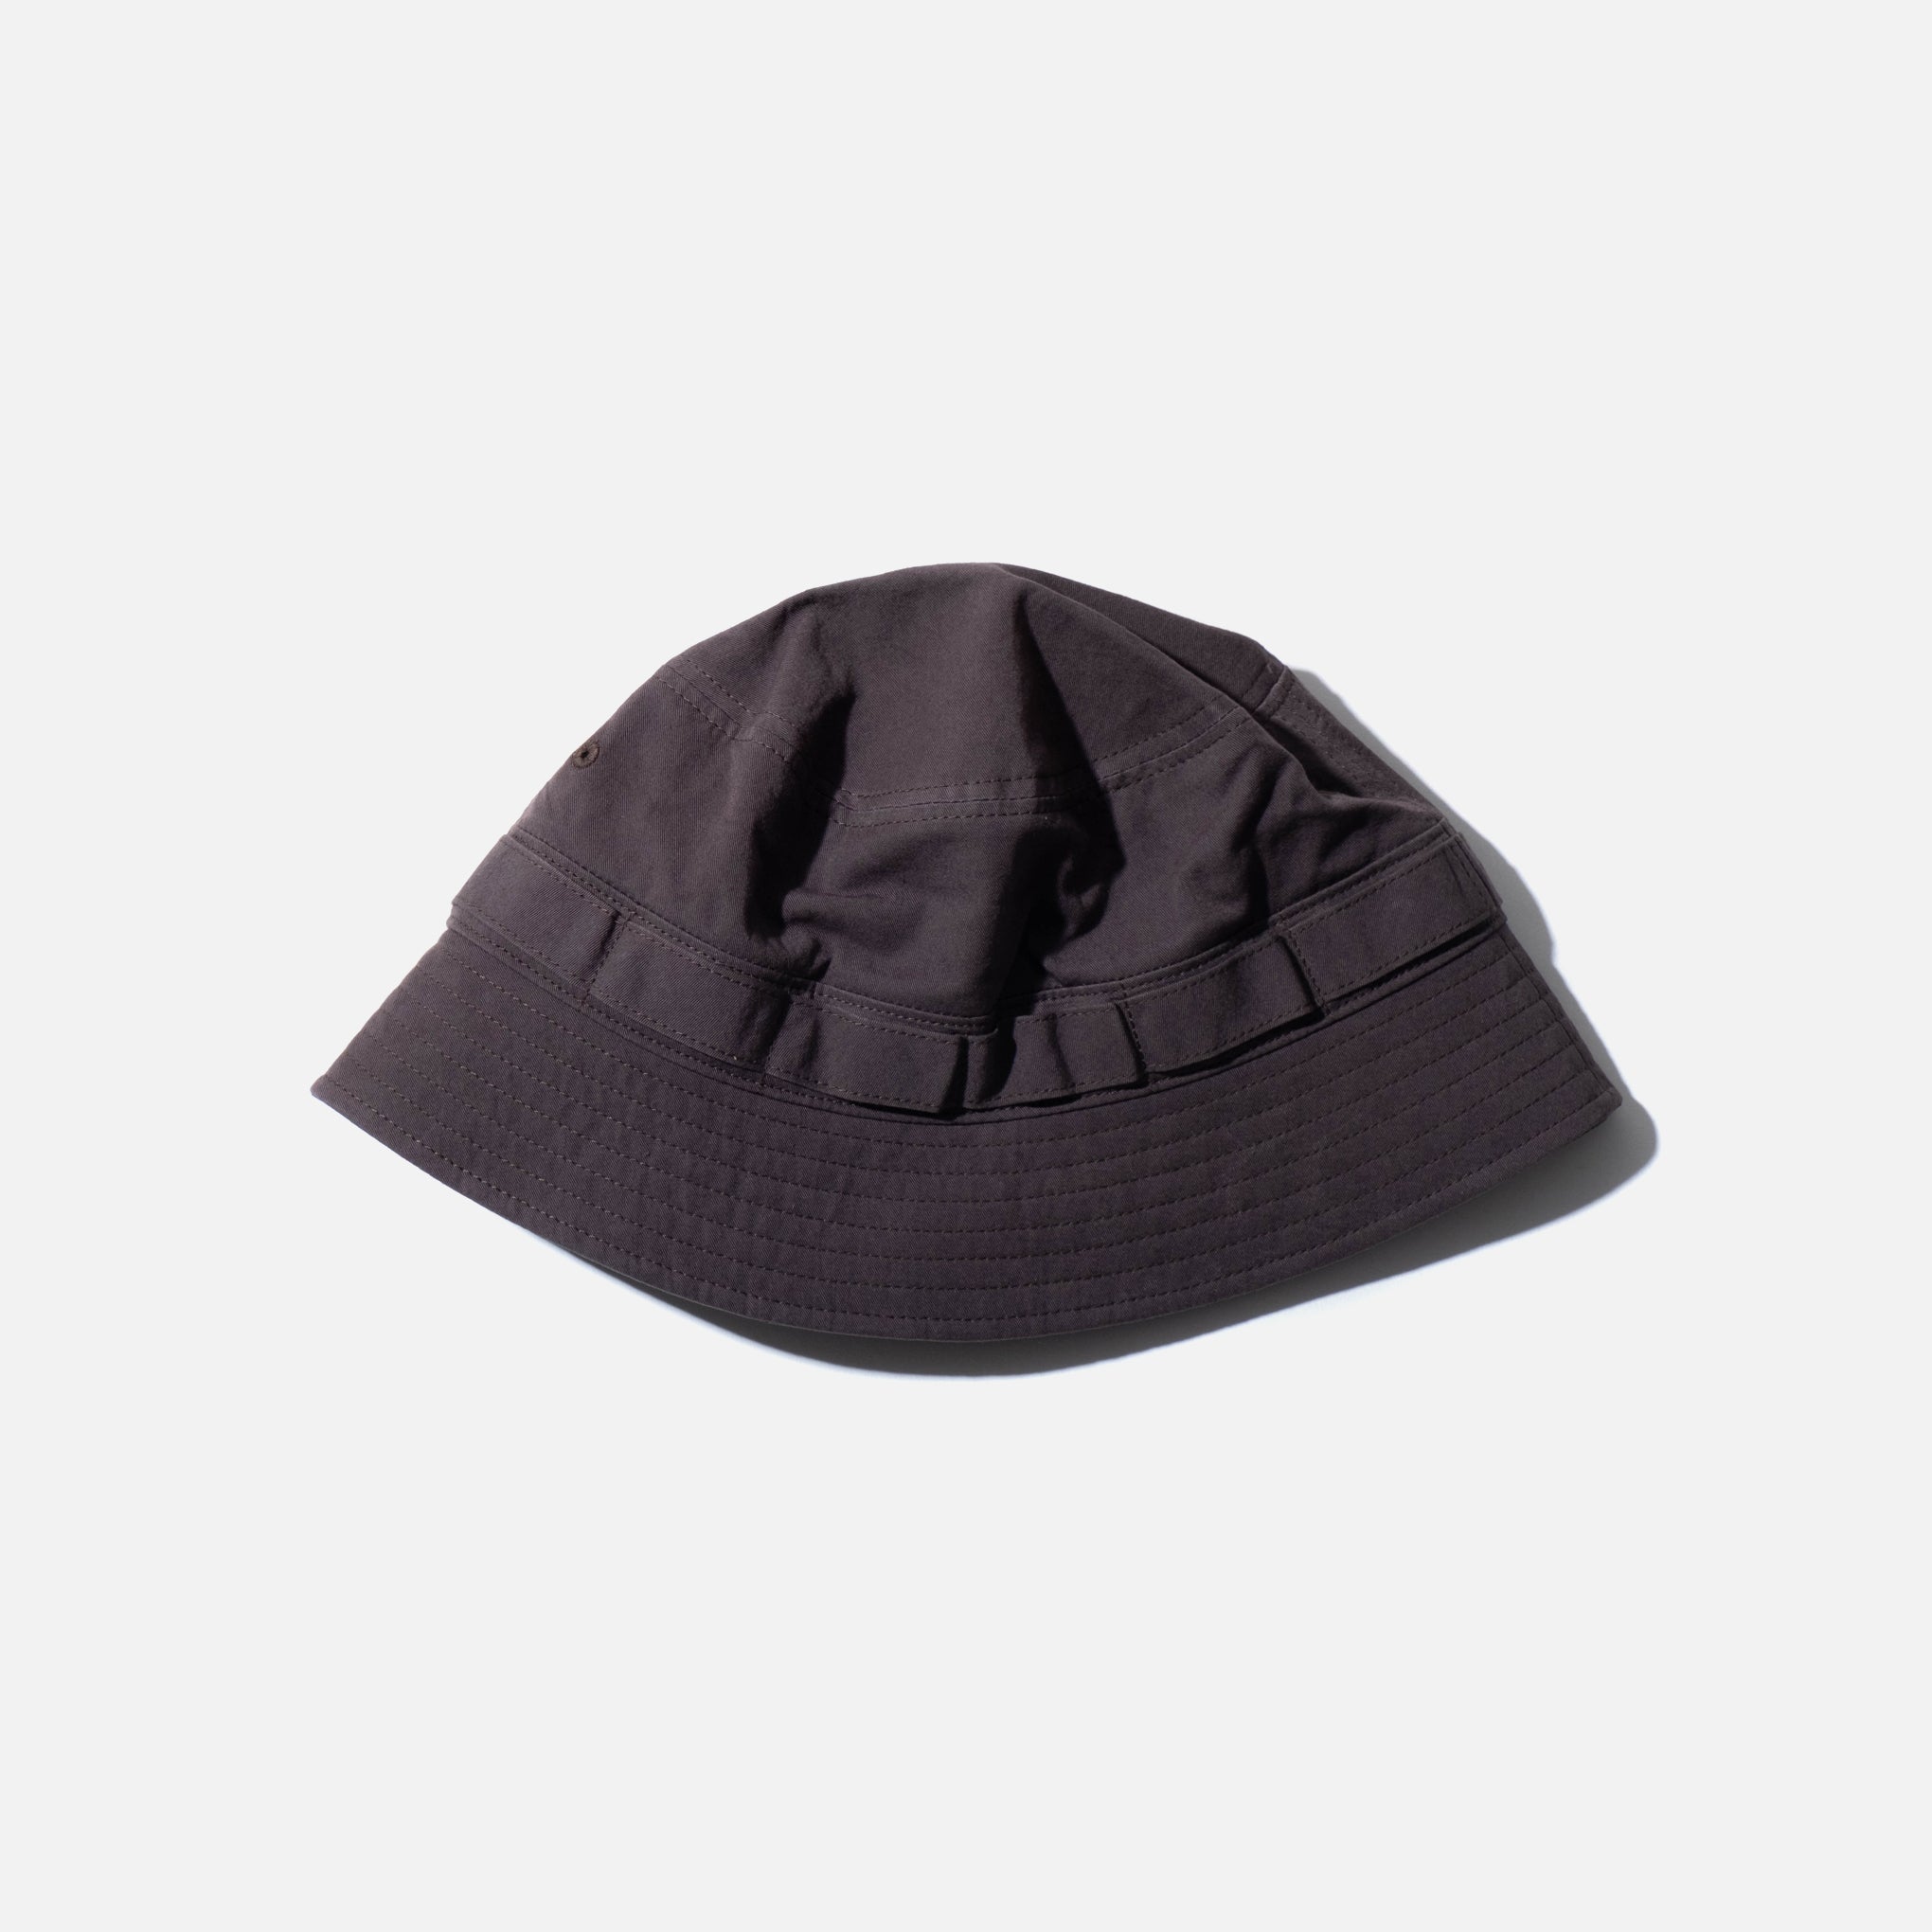 Roll Hat - Brown